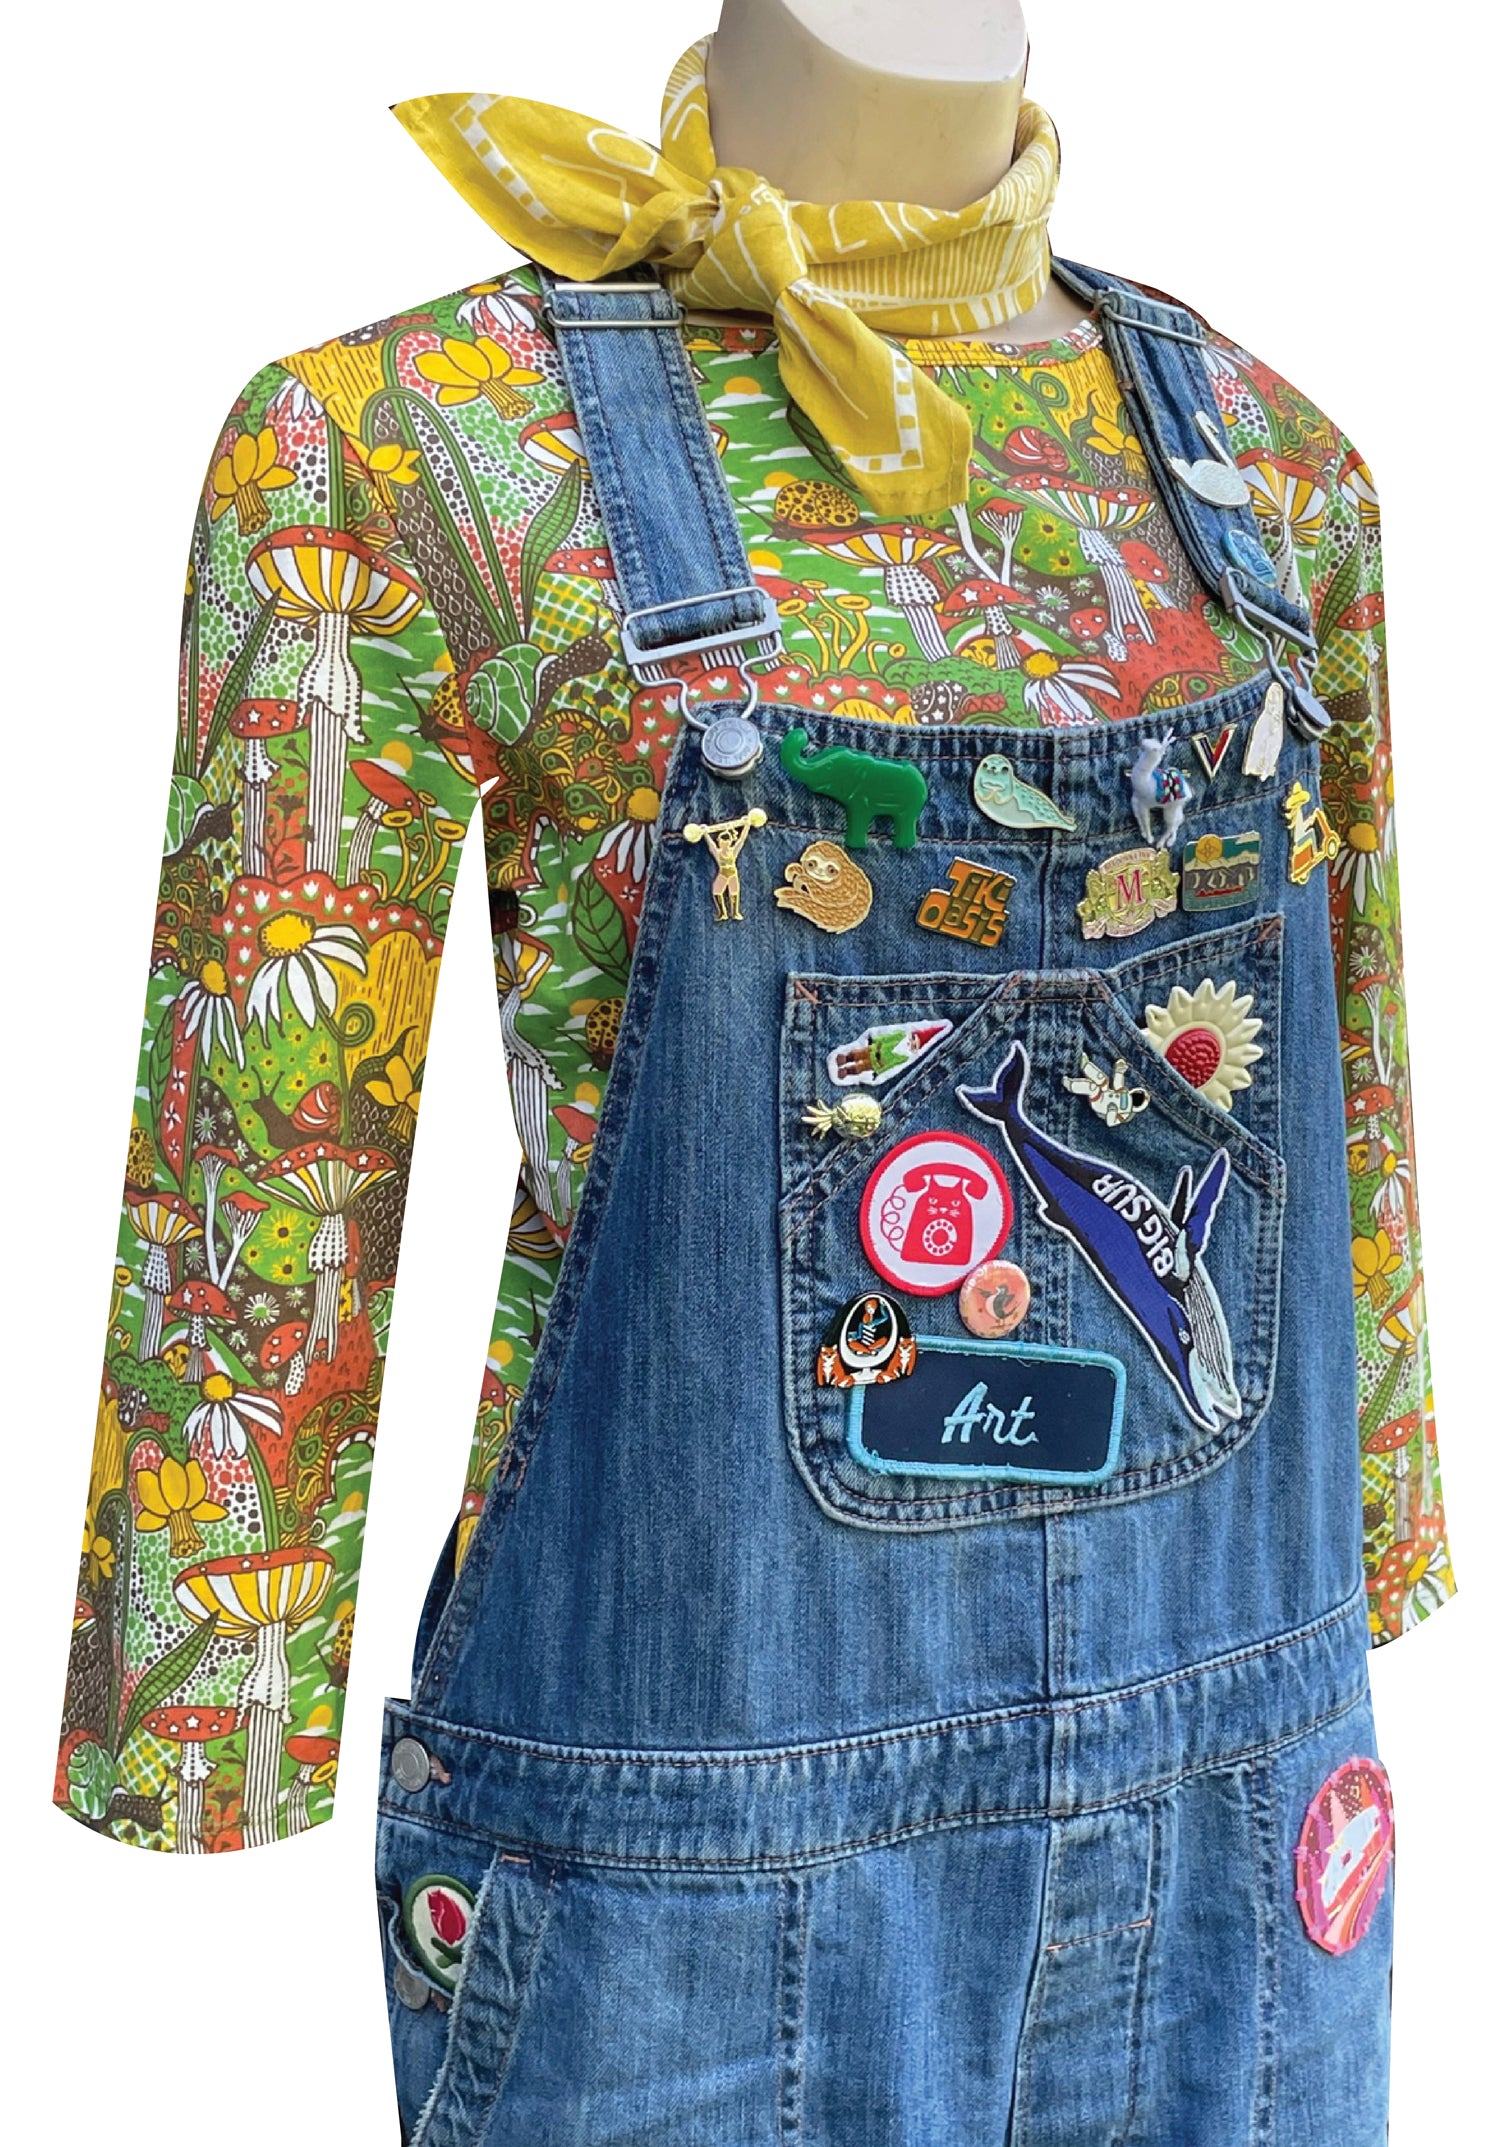 3/4 sleeve tee in green with fantastical landscape featuring mushrooms and blue jean overalls